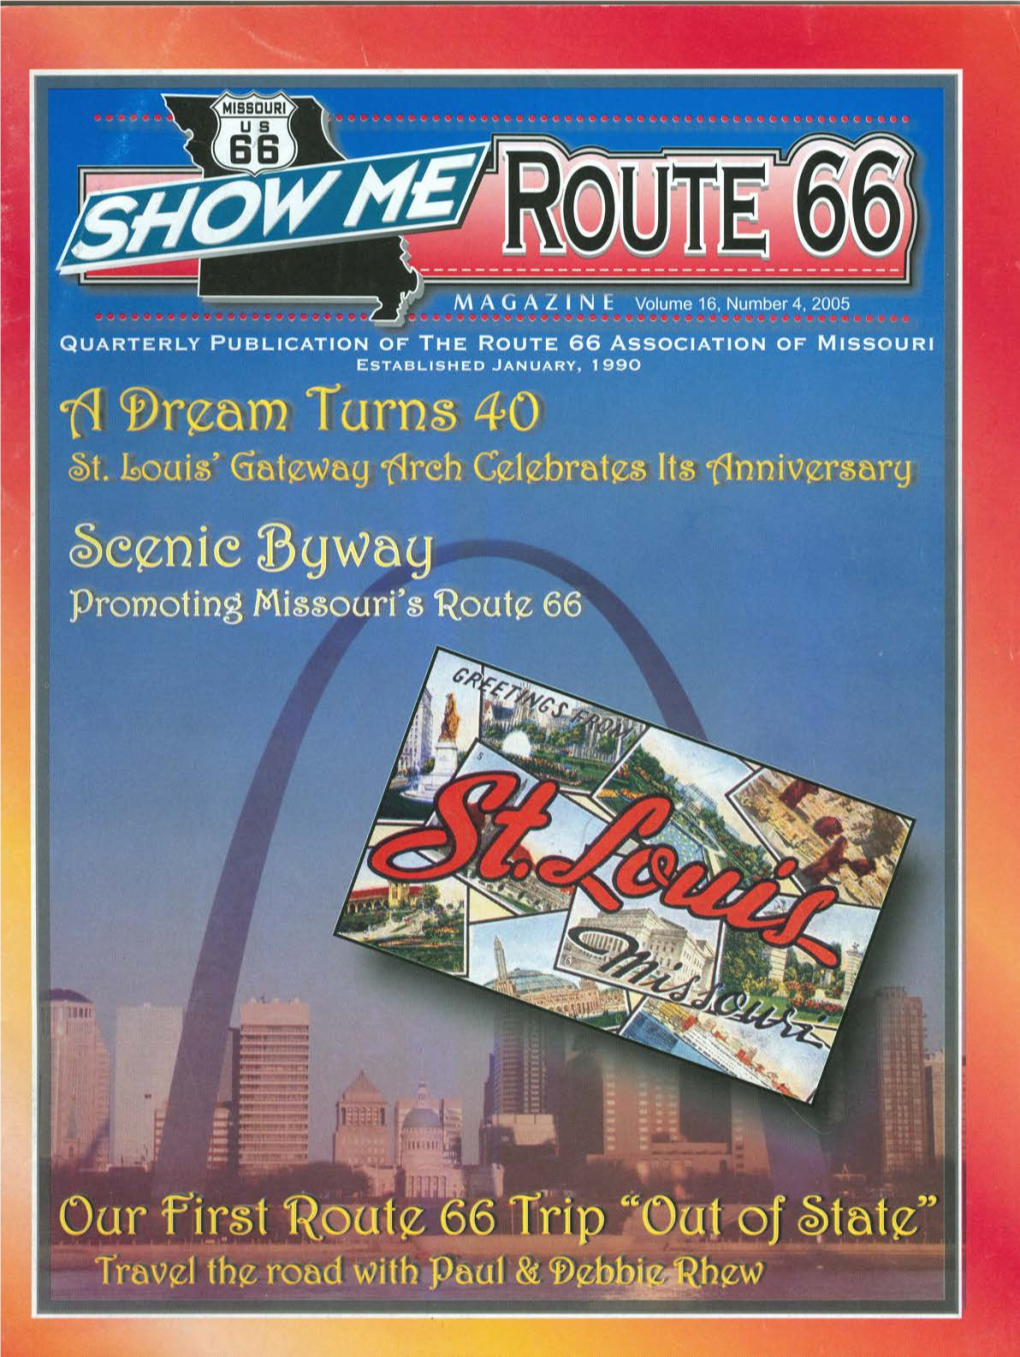 For Route 66 Association of Missouri Membership Information and To